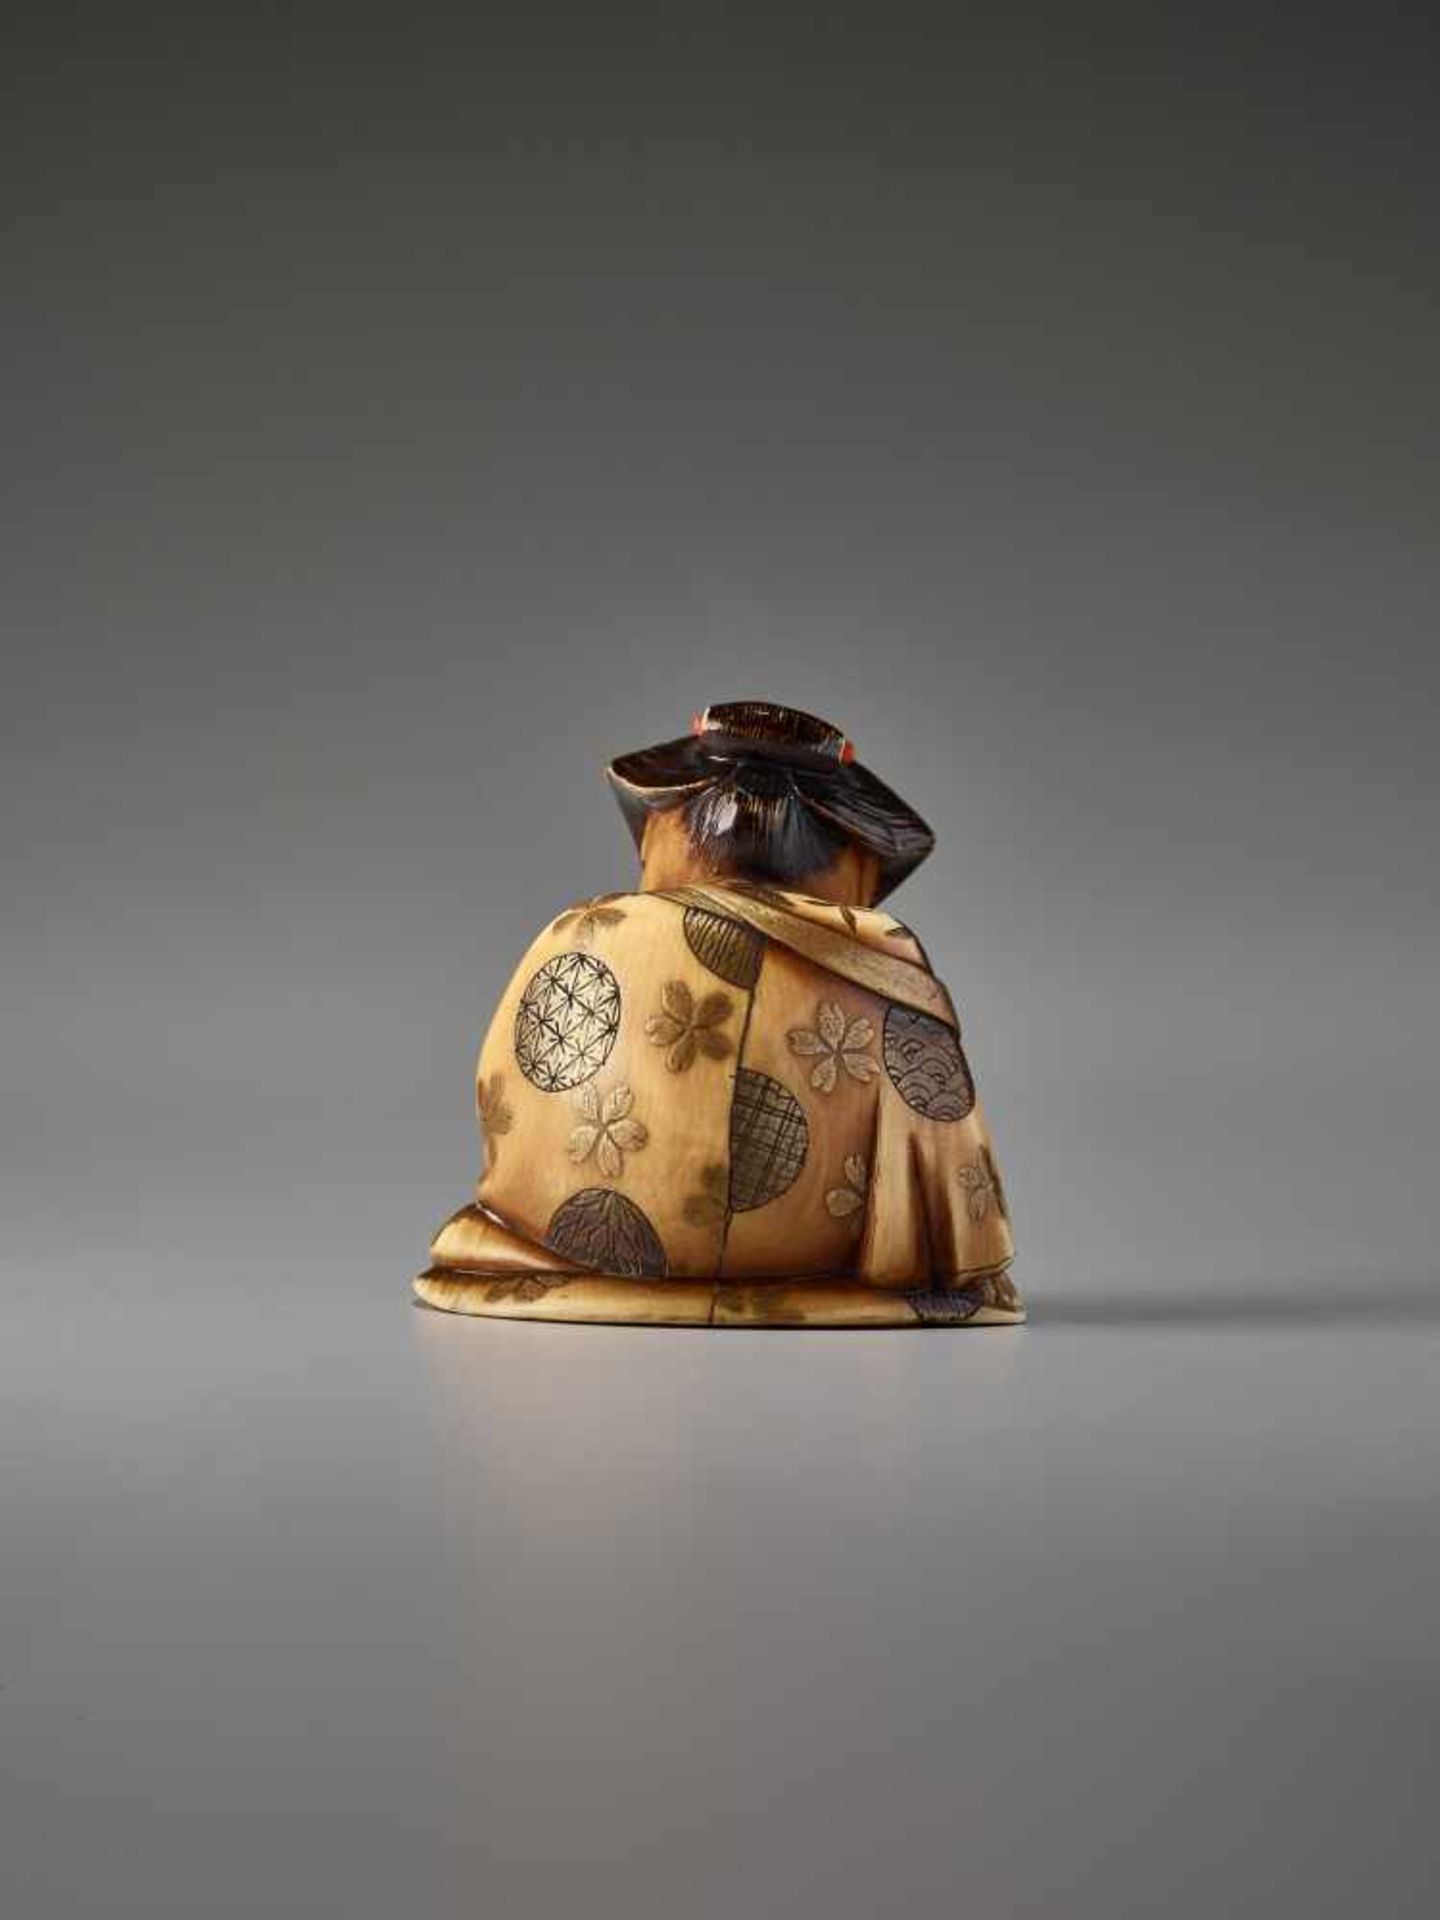 AN IVORY AND LACQUER NETSUKE OF OKAME WITH A SAKE CUP BY KEIMIN By Keimin, ivory netsuke with gold - Image 2 of 7